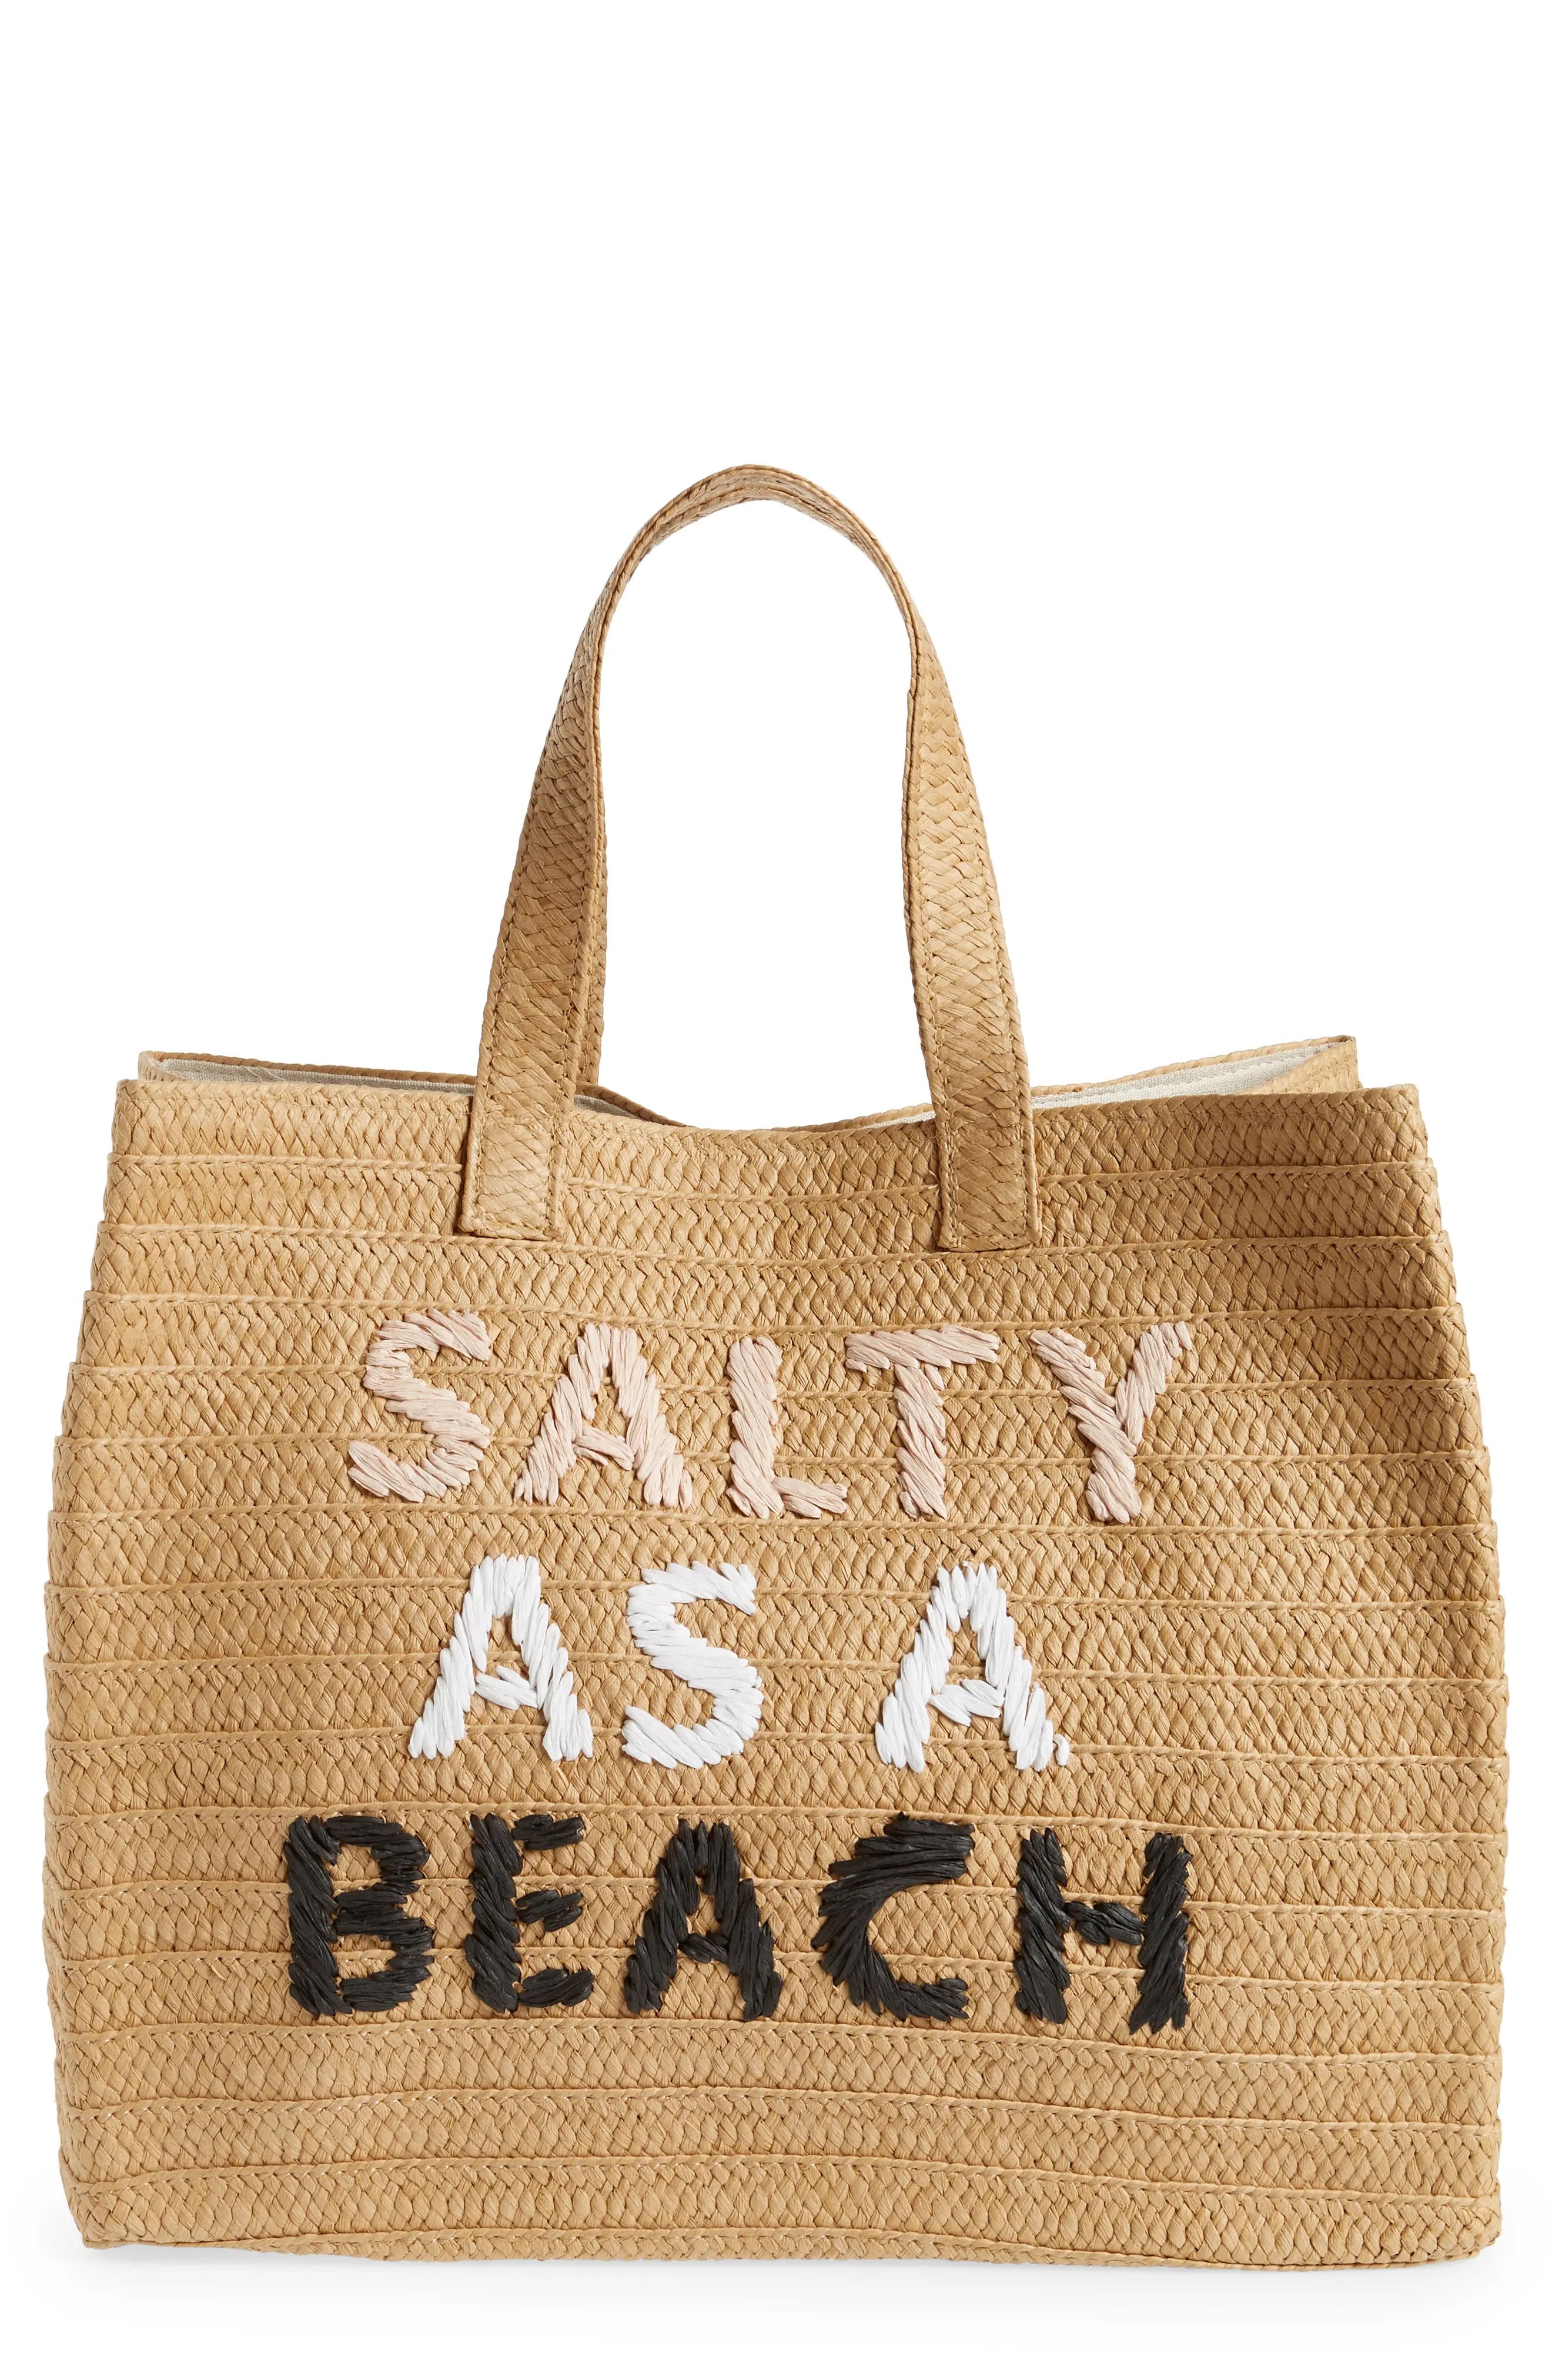 btb Los Angeles Salty as a Beach Straw Tote in Black/Dusty/White at Nordstrom | Nordstrom